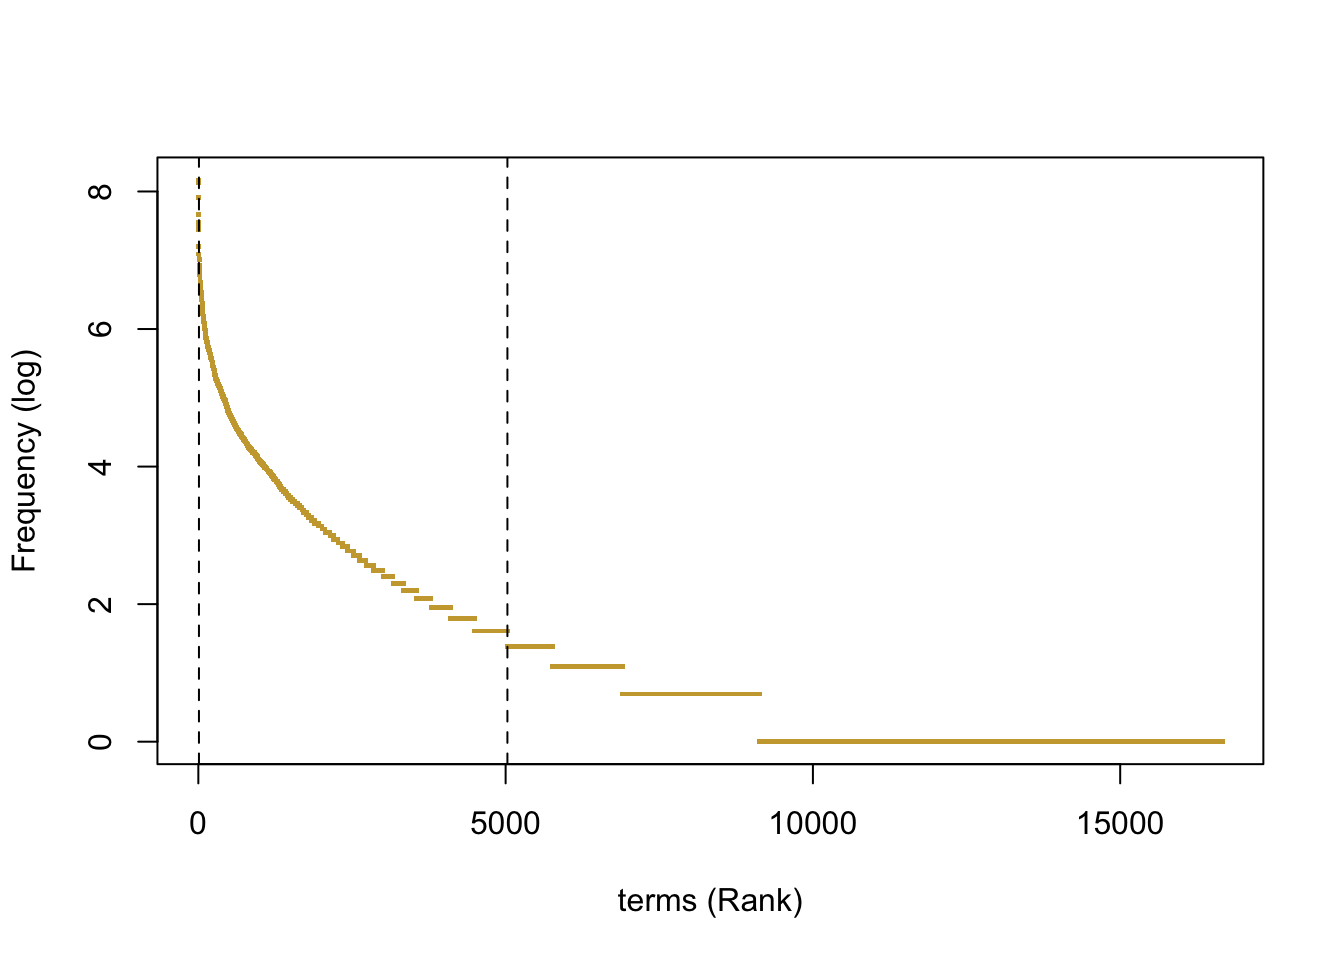 Frequency - rank plot of terms in the dtm used to build the thesaurus. Frequencies of words included in the thesaurus falled between the dashed lines.)